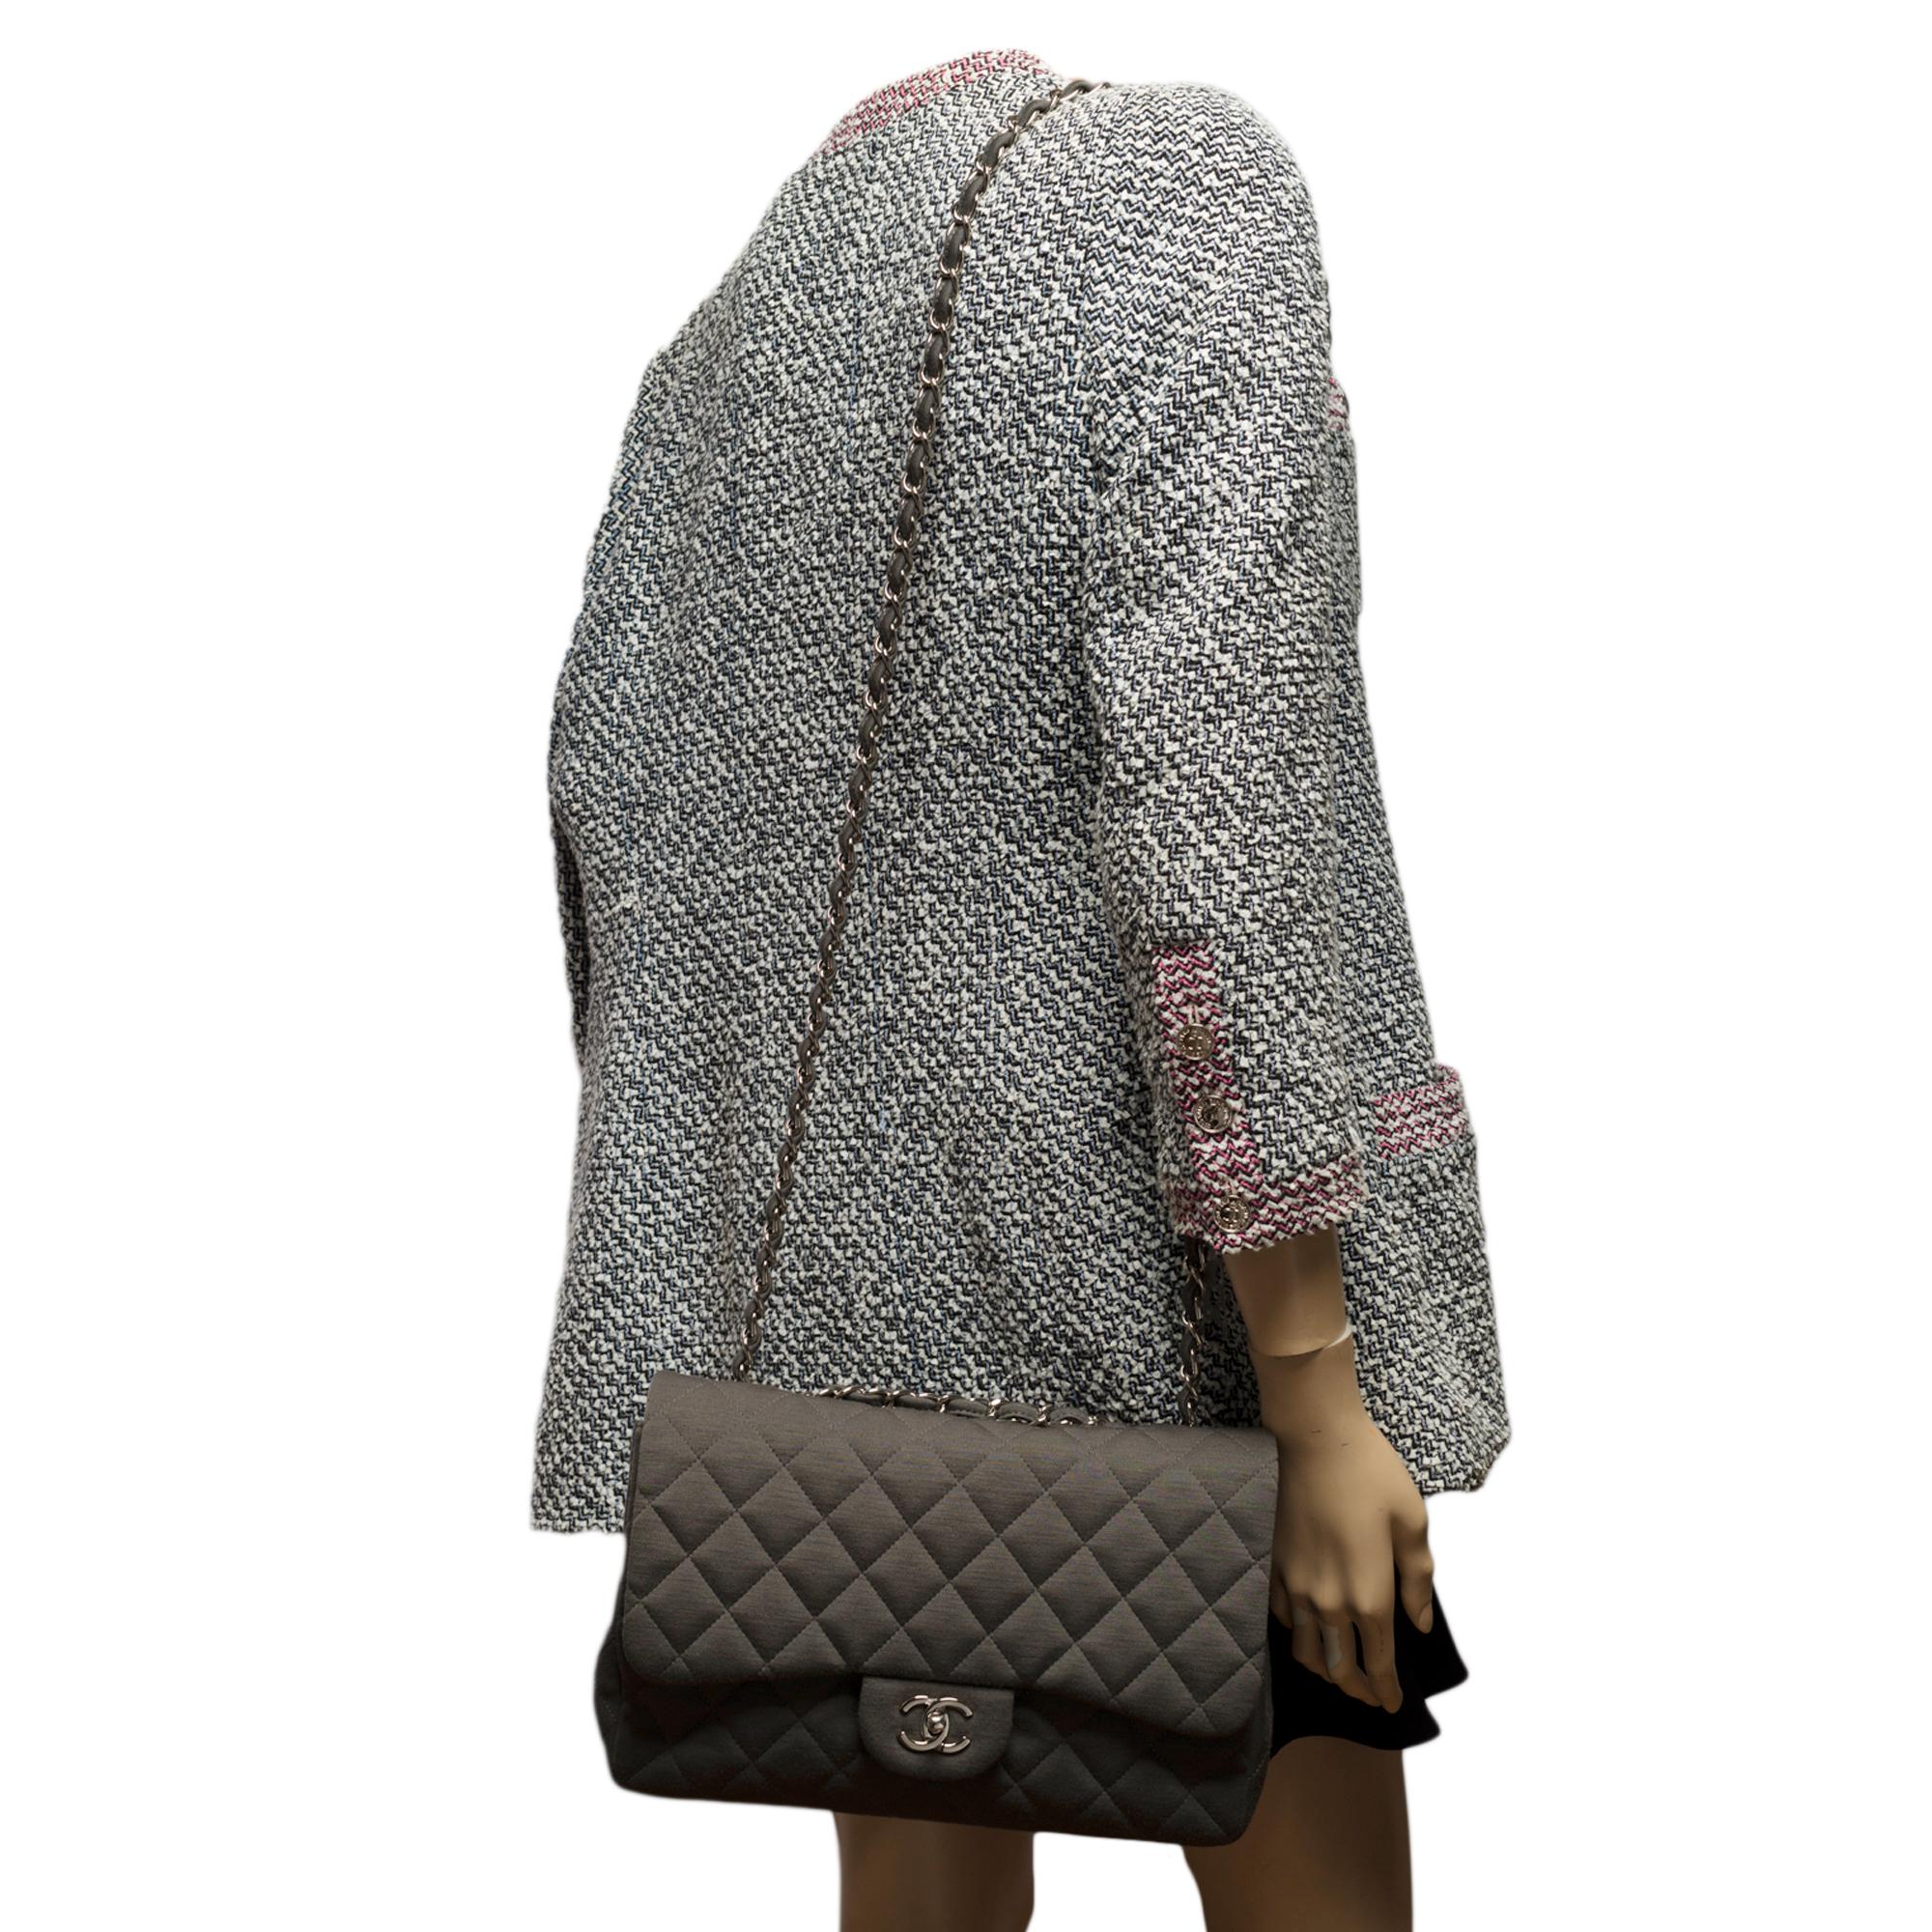 Chanel Timeless Jumbo single flap shoulder bag in grey quilted jersey, SHW 4